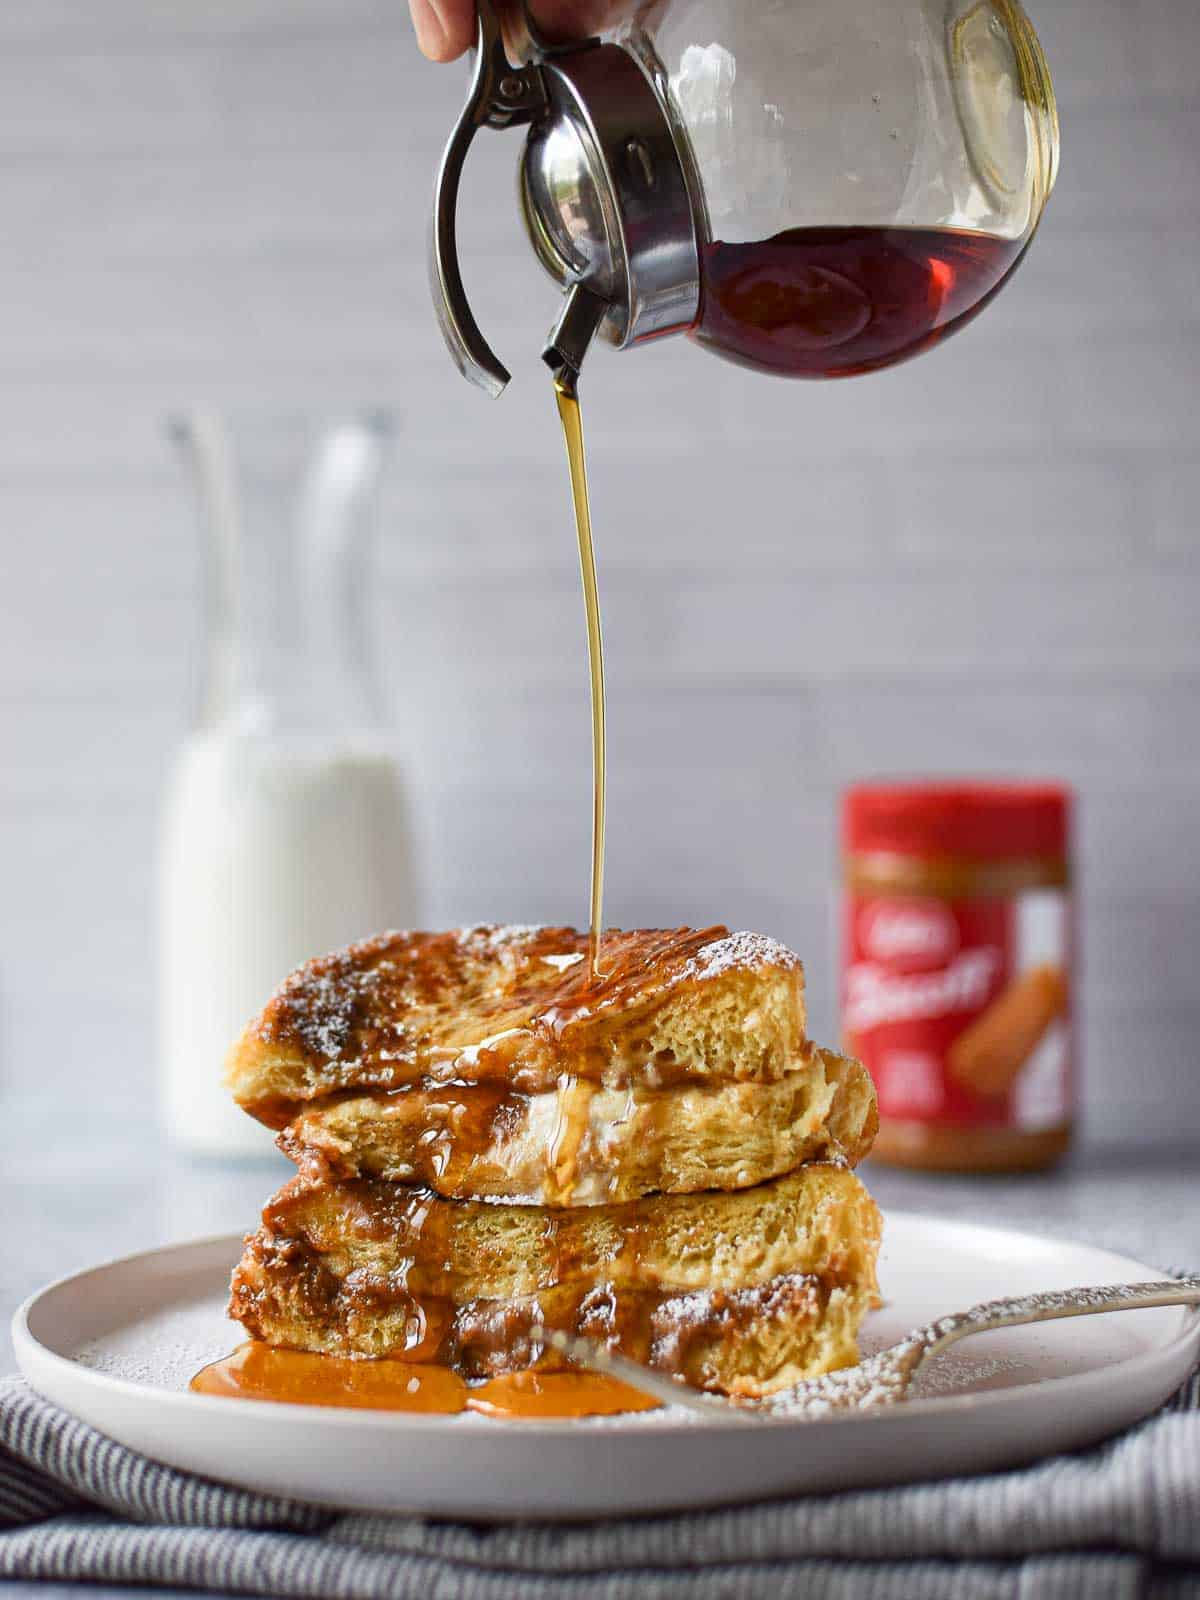 Syrup being poured over Biscoff stuffed French toast.